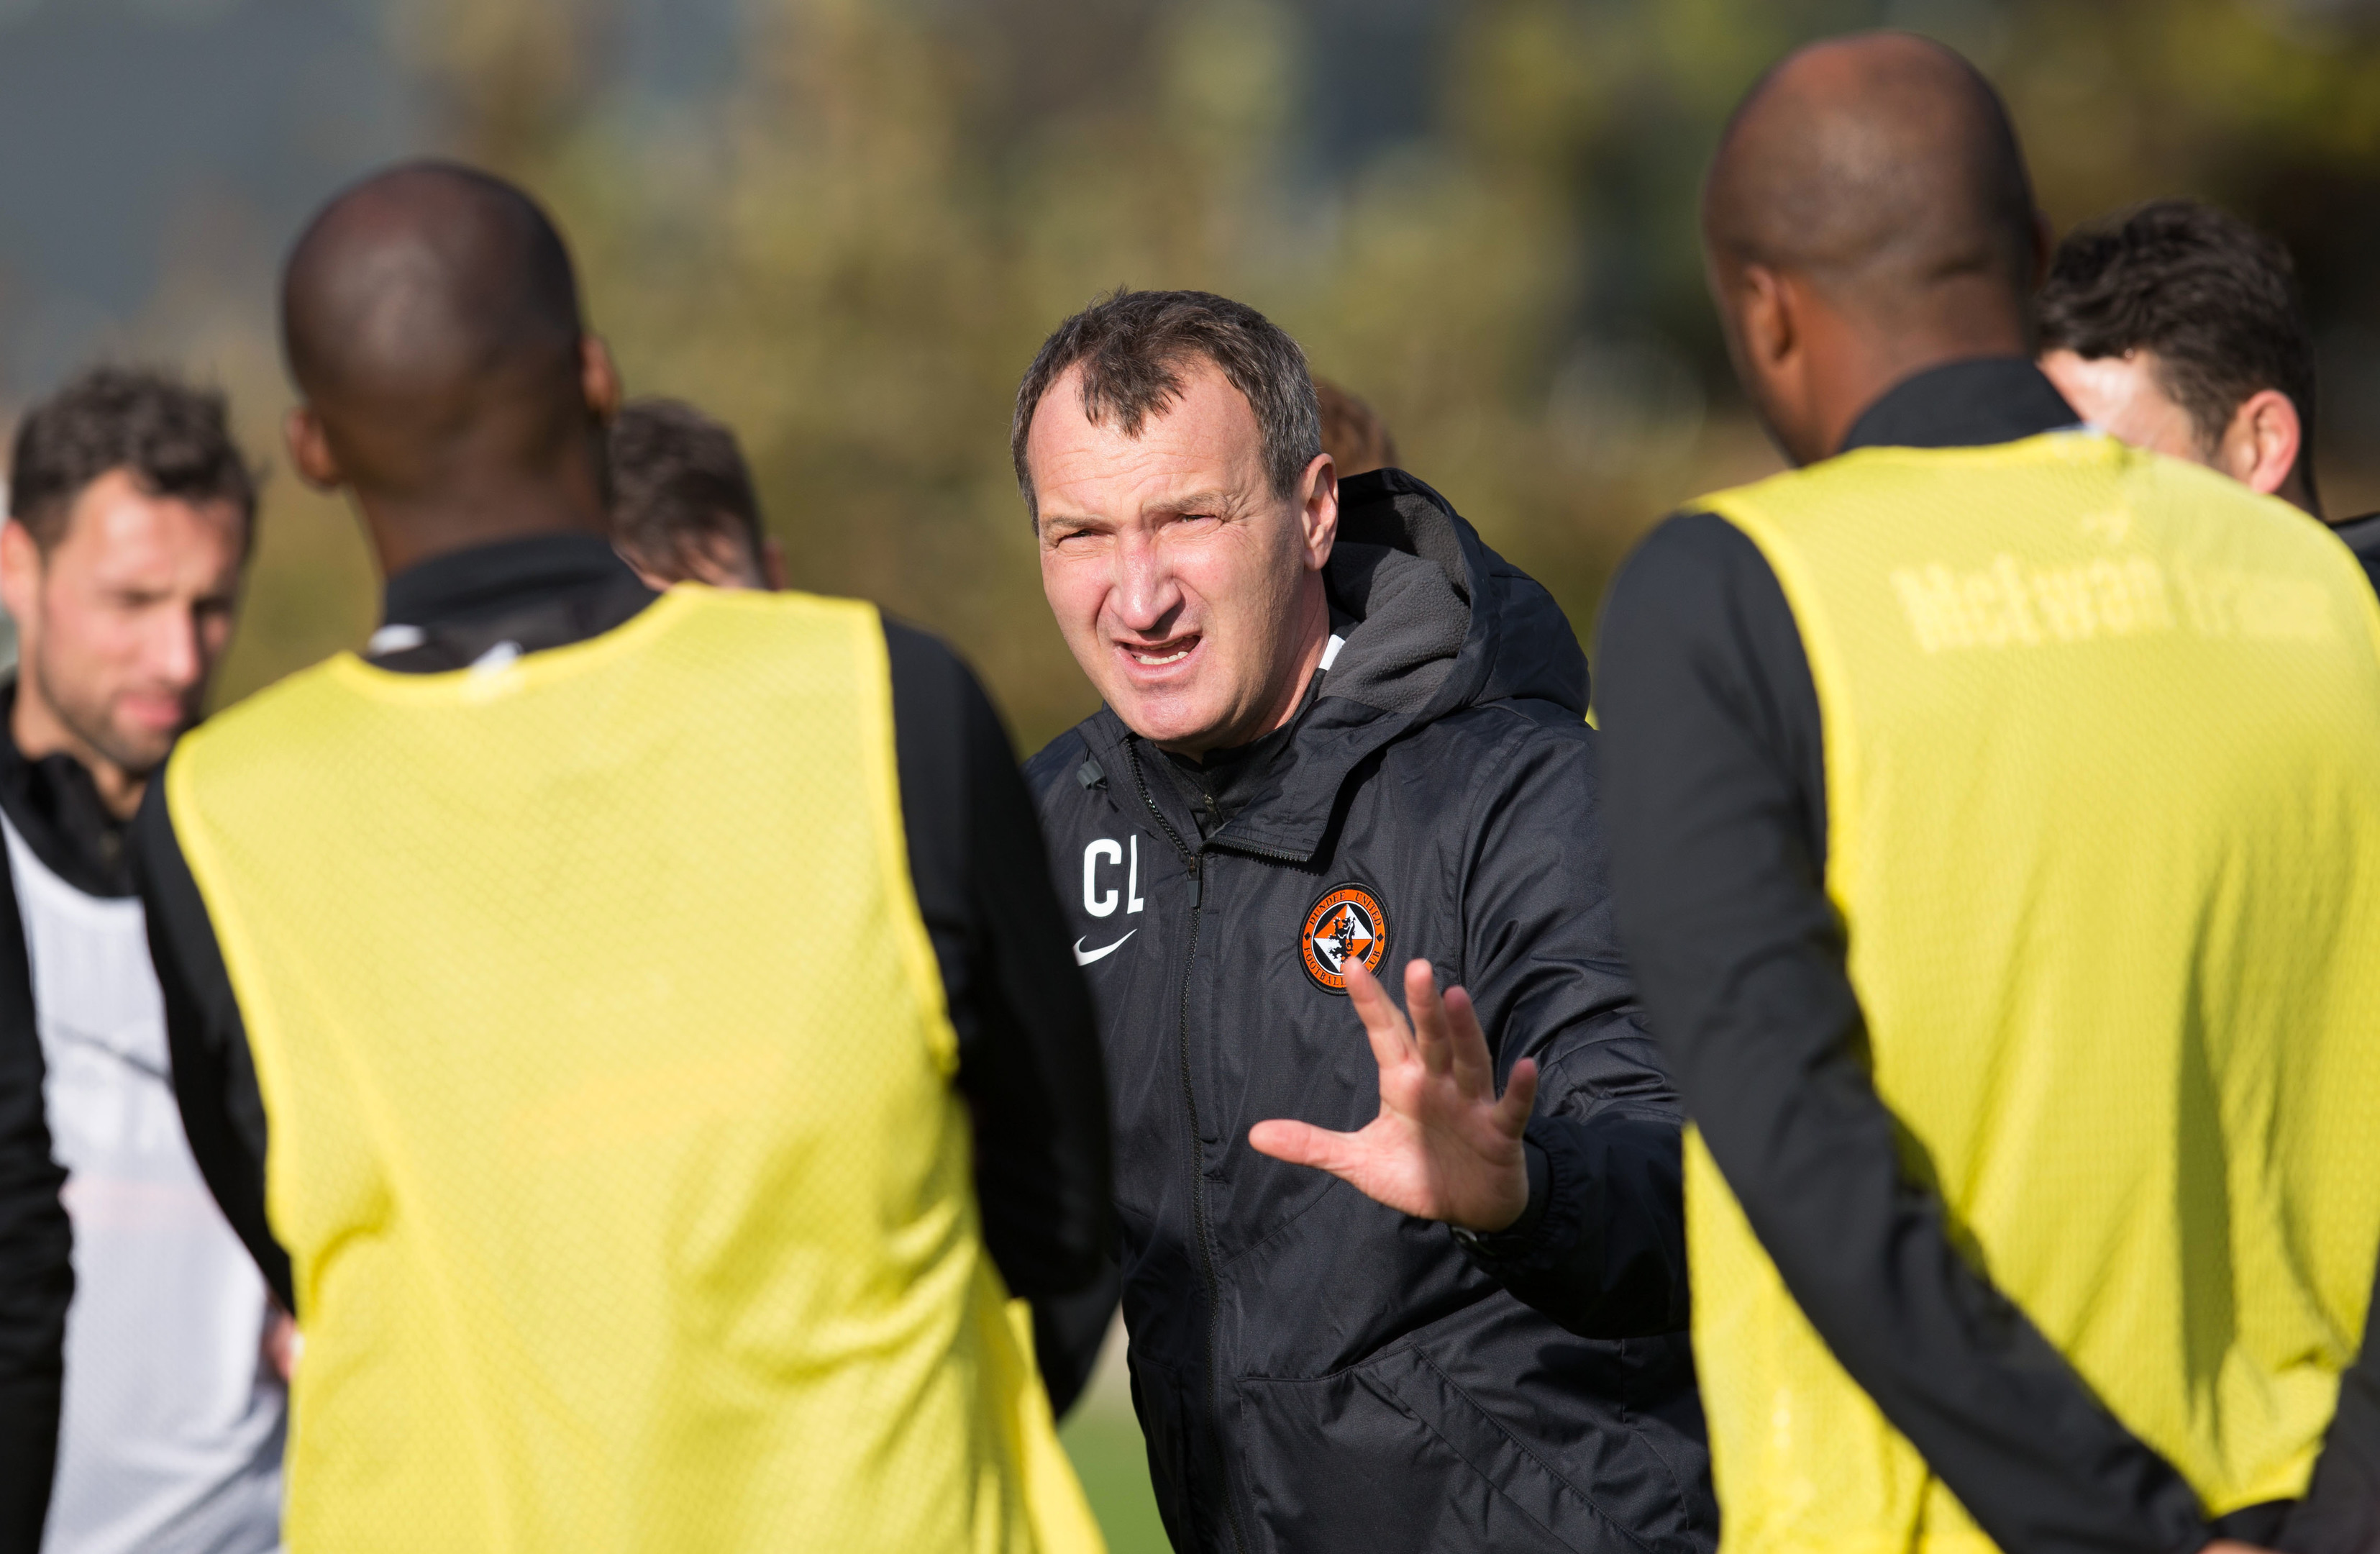 New Dundee United manager Czaba Laszlo speaks to his players during his first training session with the team.